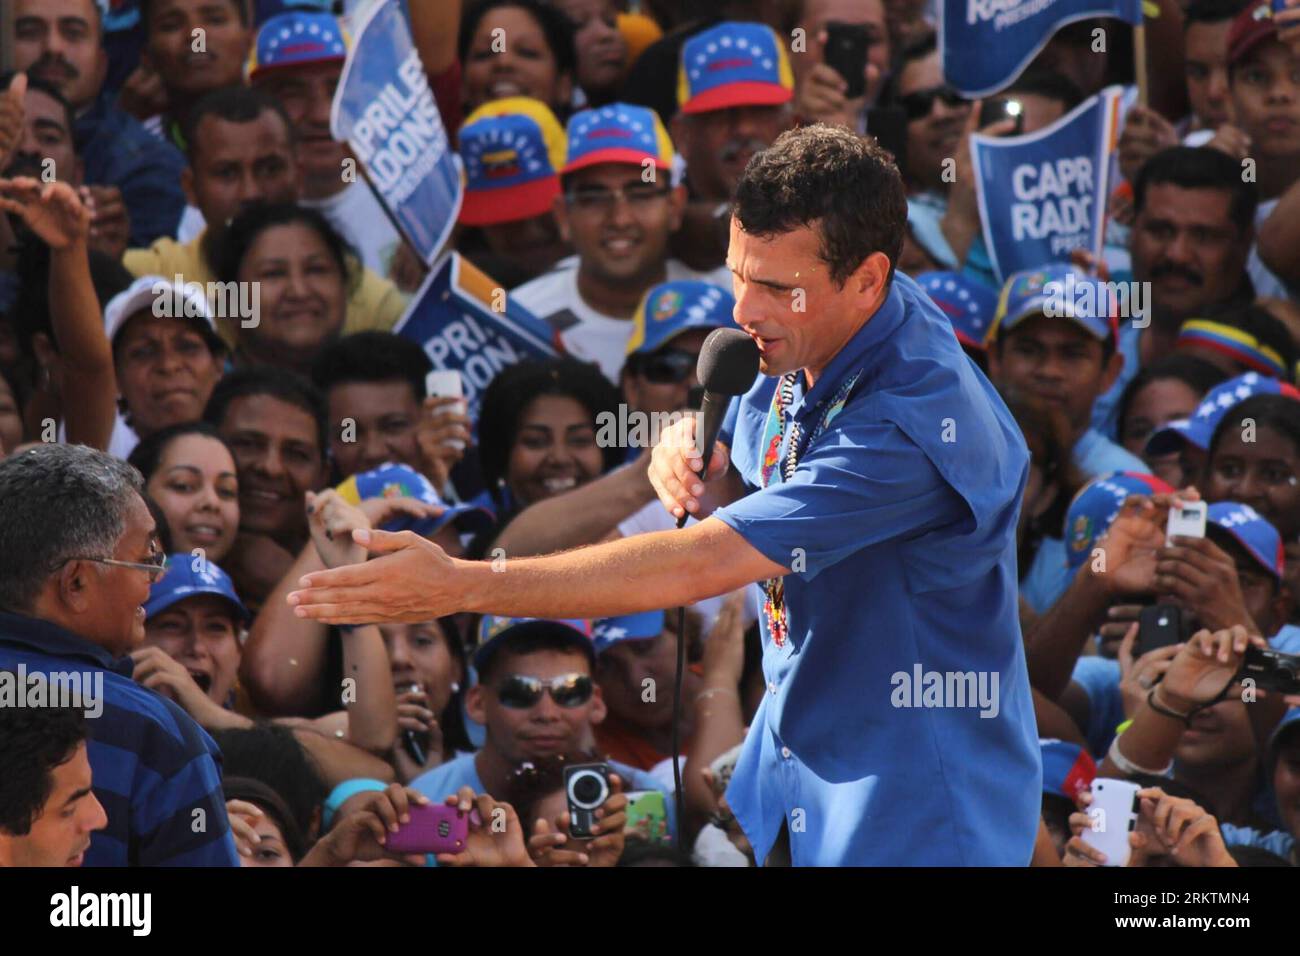 Bildnummer: 58515061  Datum: 25.09.2012  Copyright: imago/Xinhua (120926) -- DELTA AMACURO, Sept. 26, 2012 (Xinhua) -- Venezuela s opposition presidential candidate Henrique Capriles attends a rally in Delta Amacuro, Venezuela, on Sept. 25, 2012. Venezuelans will vote for their next president on Oct. 7. (Xinhua/Comando Venezuela) (nxl) VENEZUELA-DELTA AMACURO-OPPOSITION-CAPRILES-RALLY PUBLICATIONxNOTxINxCHN Politik People x0x xac 2012 quer      58515061 Date 25 09 2012 Copyright Imago XINHUA  Delta Amacuro Sept 26 2012 XINHUA Venezuela S Opposition Presidential Candidate Henrique  Attends a Ra Stock Photo